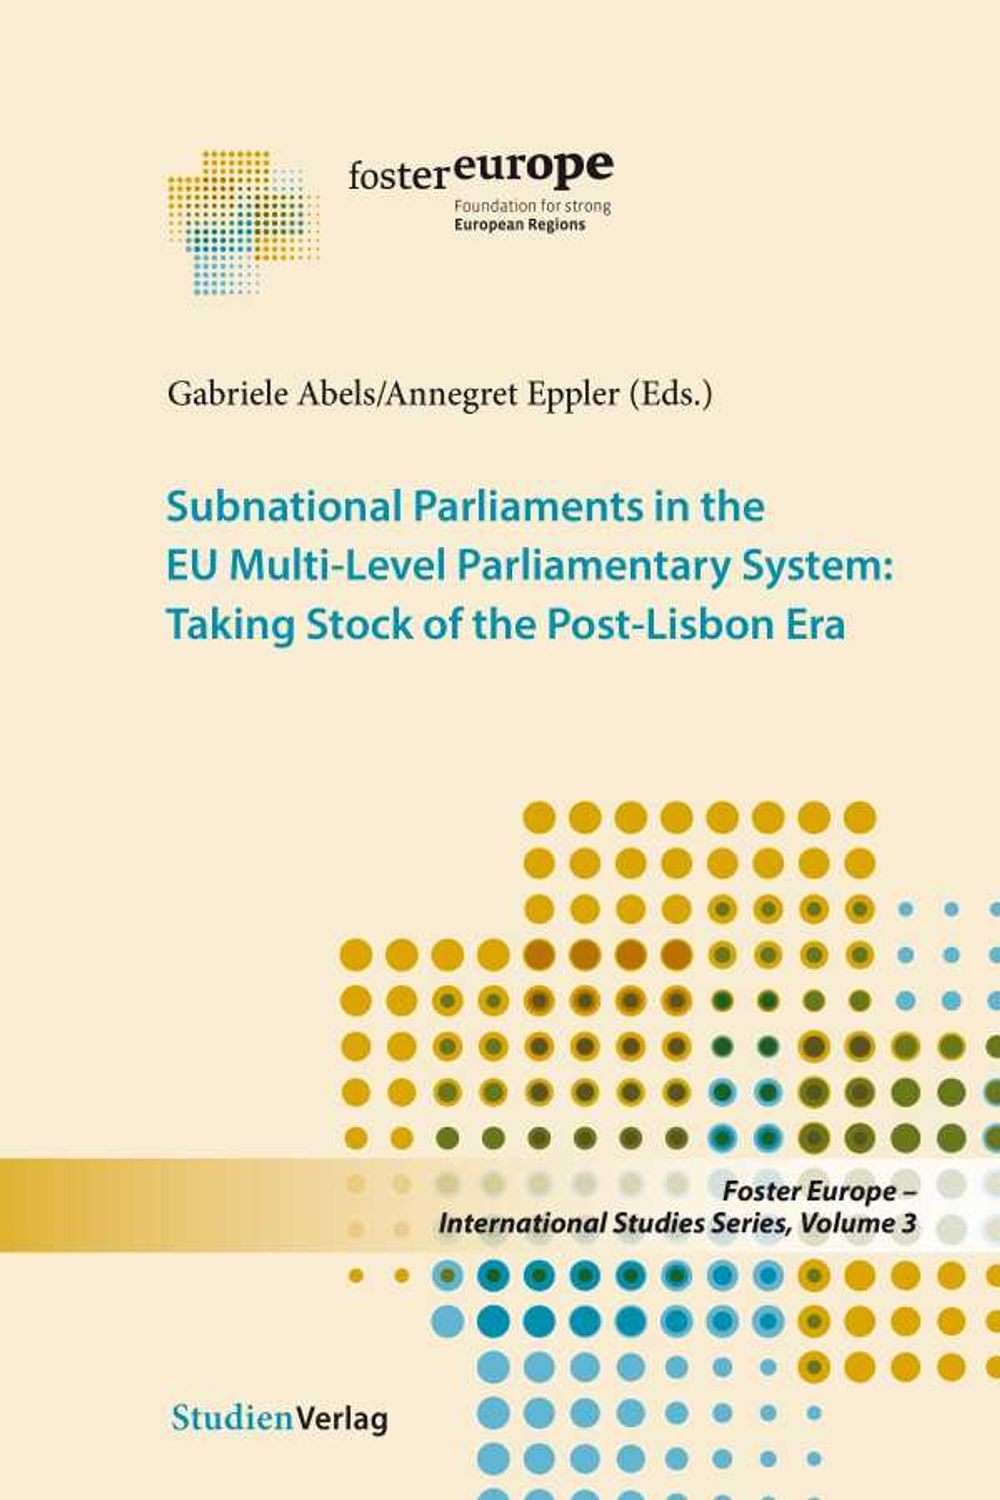 bw-subnational-parliaments-in-the-eu-multilevel-parliamentary-system-studienverlag-9783706558136